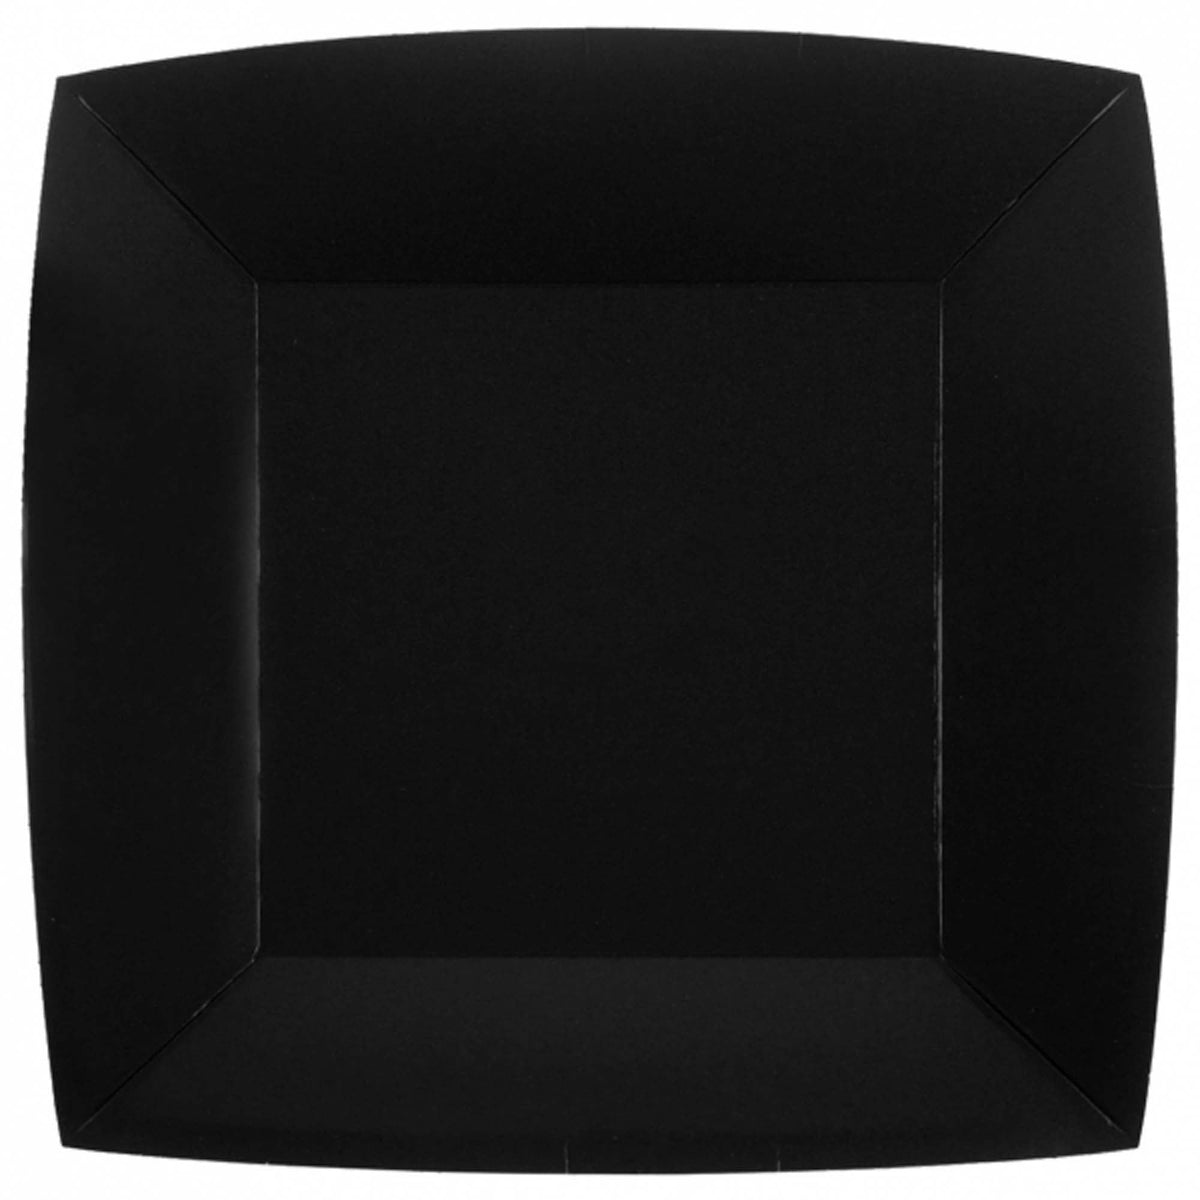 SANTEX Everyday Entertaining Black Large Square Lunch Party Paper Plates, 9 Inches, 10 Count 3660380072171